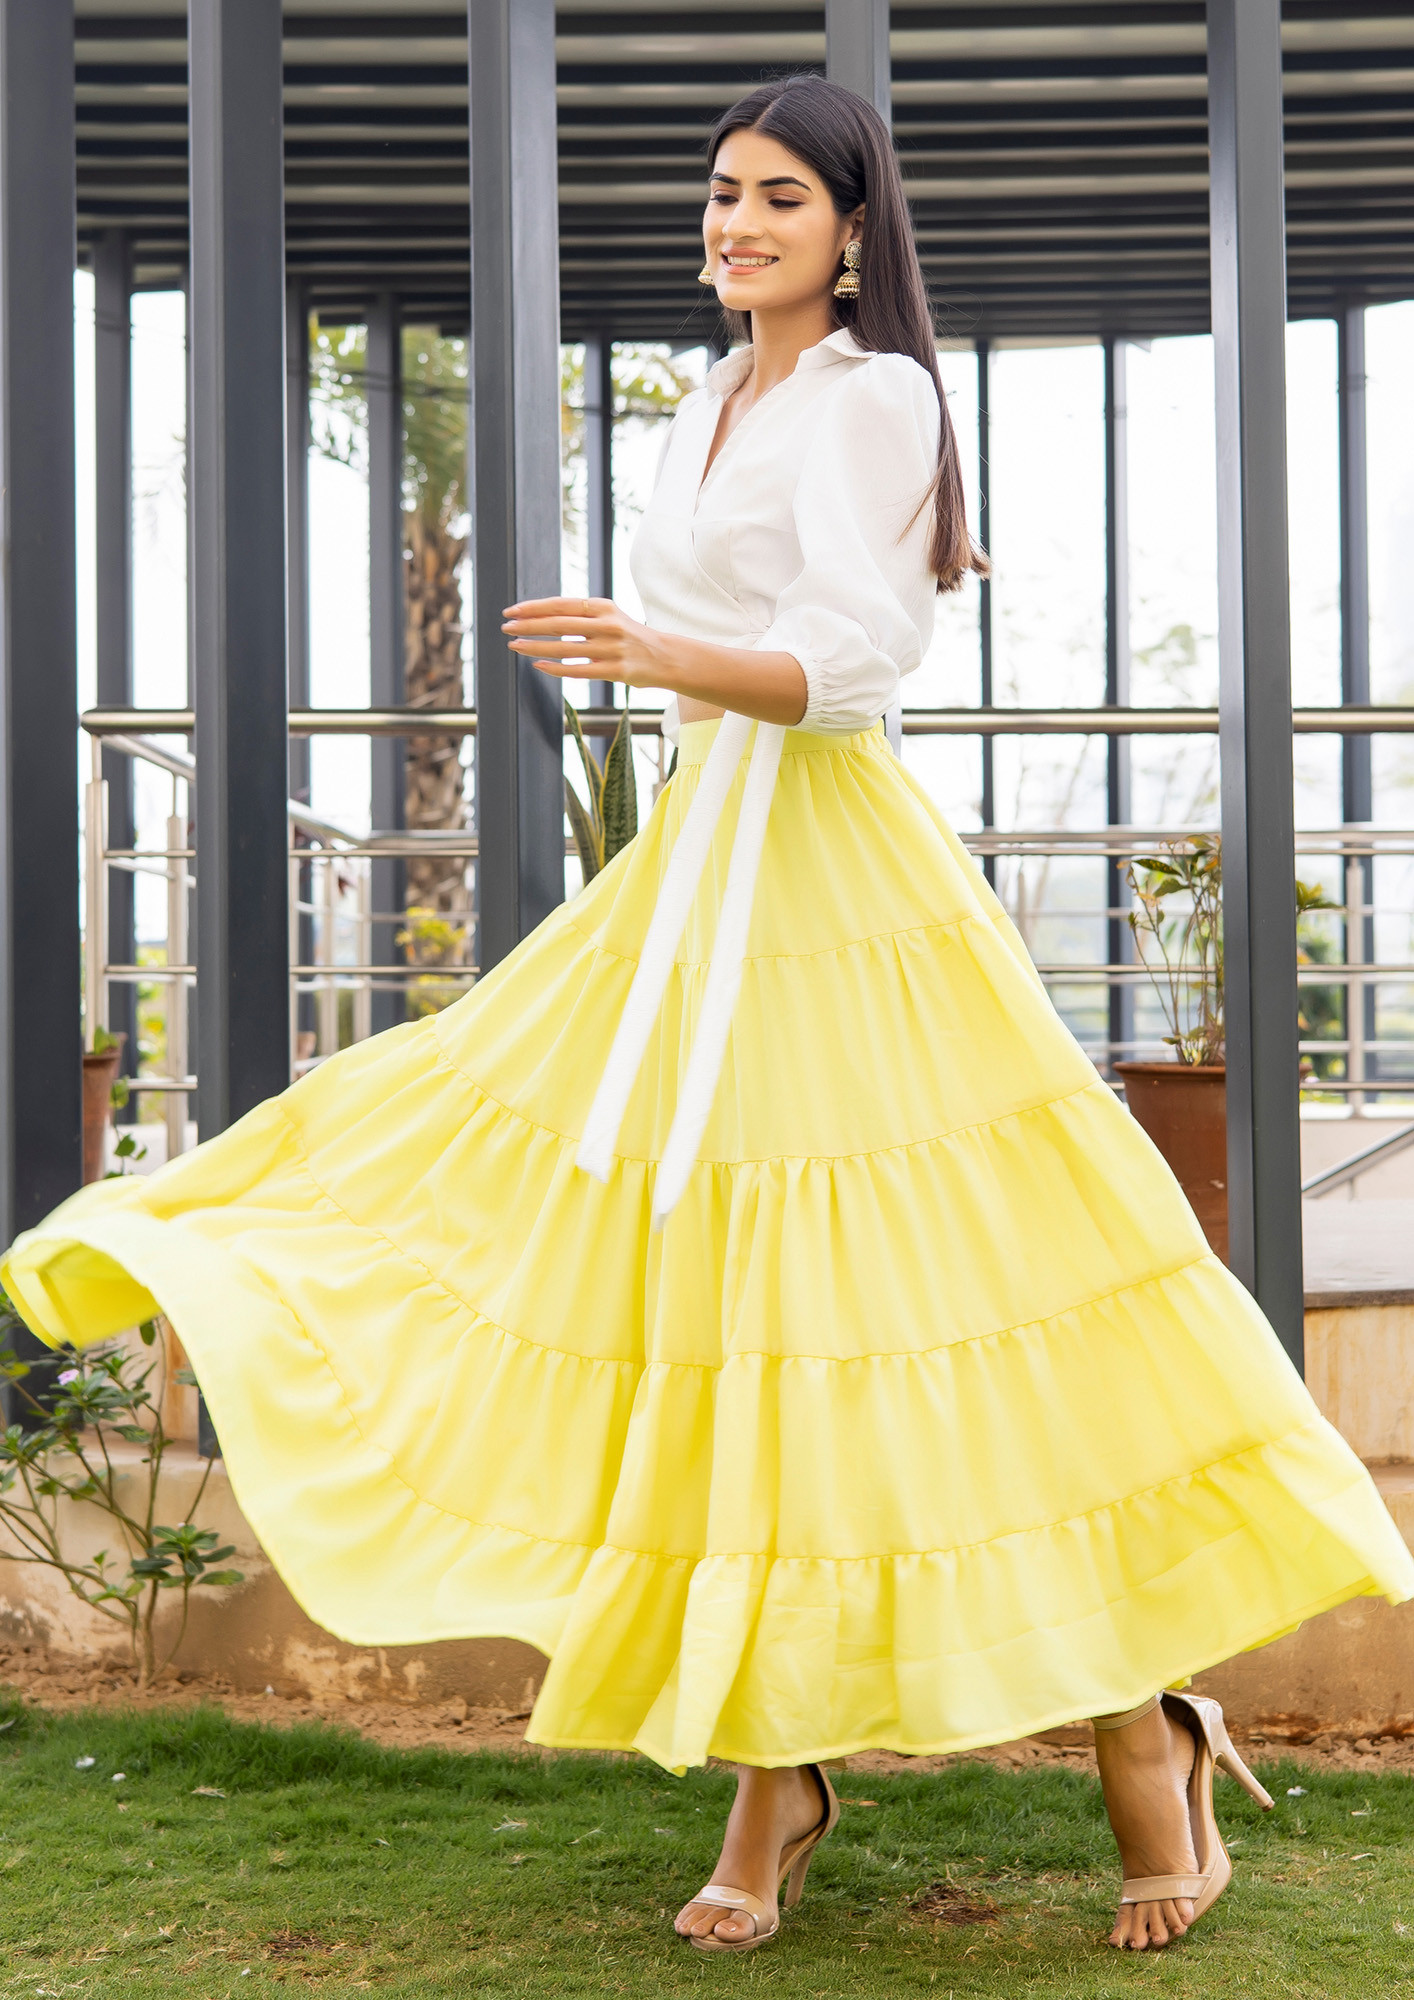 Yellowish Tier Skirt With Top Co-Ord Set